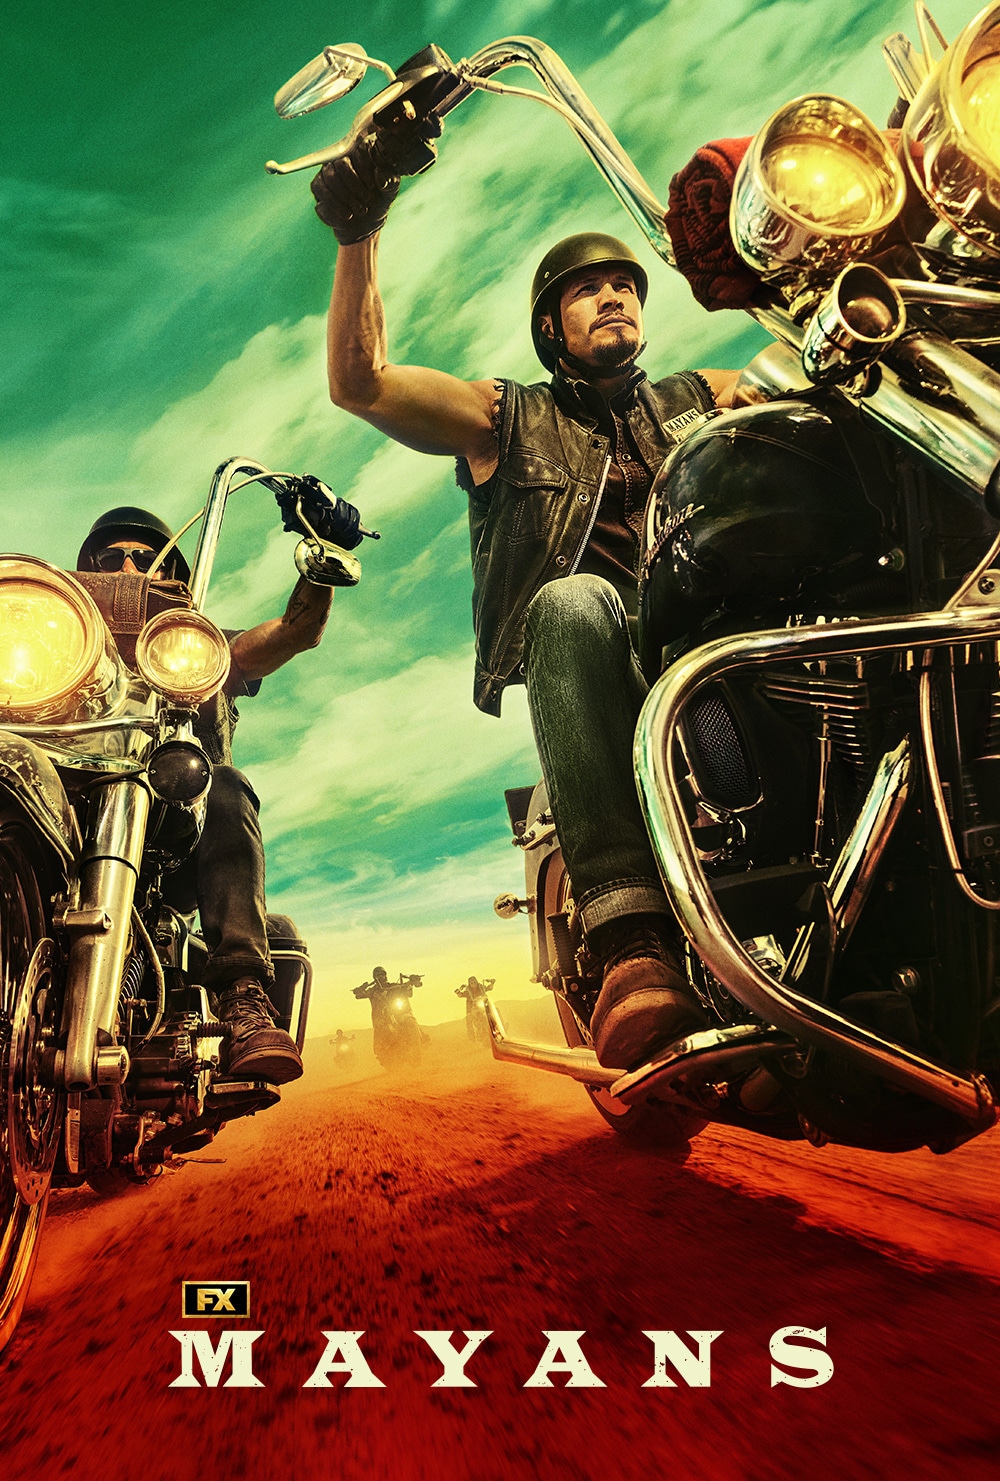 JD Pardo riding a motorcycle outside on red dirt and green sky in the background for Mayans MC